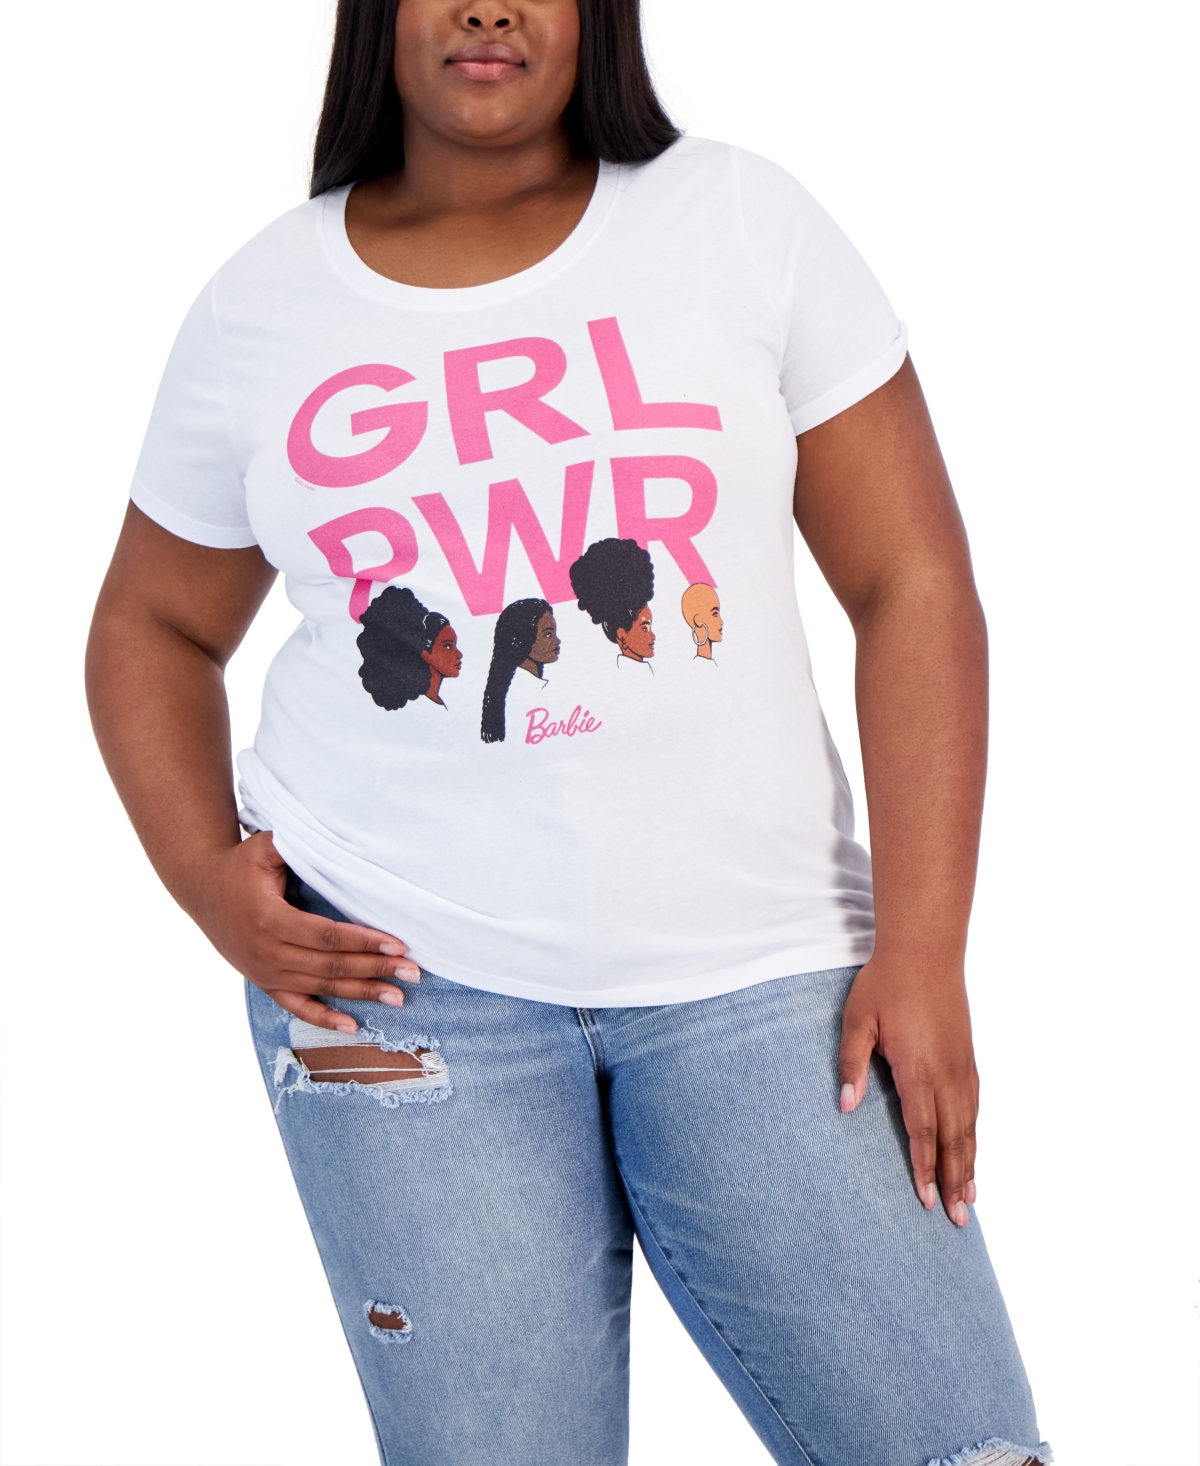 Air Waves Trendy Plus Size Black History Barbie Girl Power Graphic T-Shirt - White